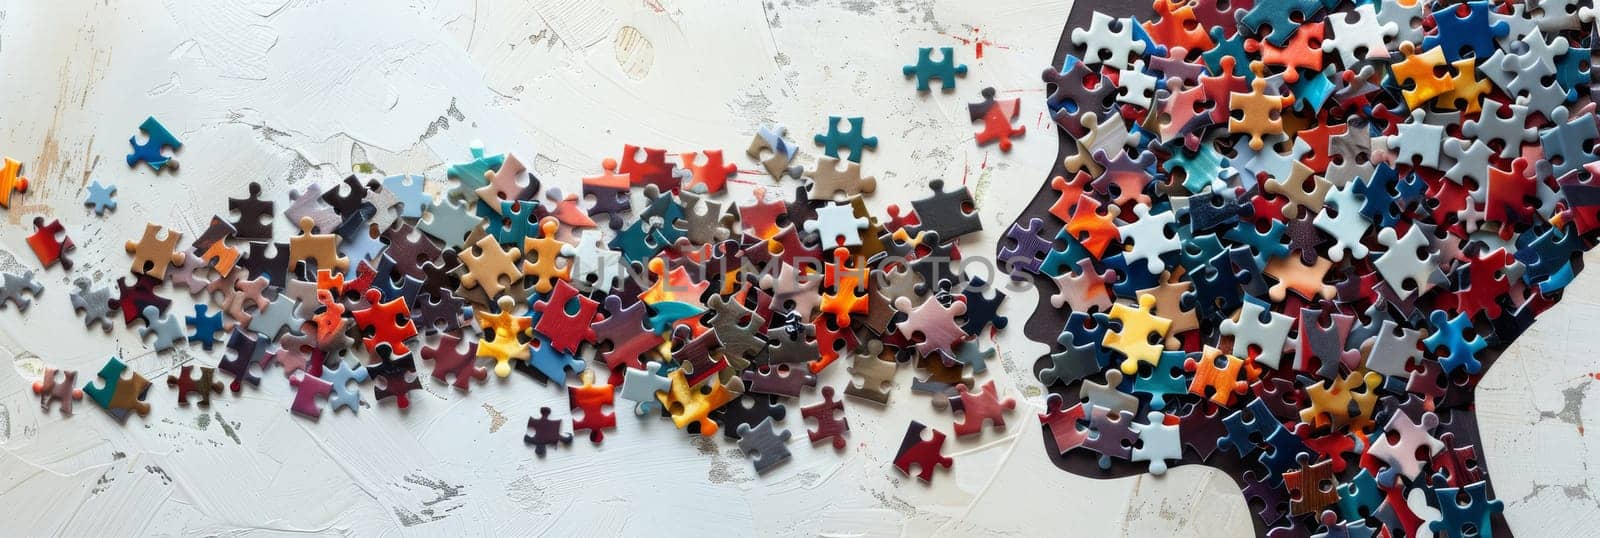 A puzzle of a head with pieces scattered around it by AI generated image.